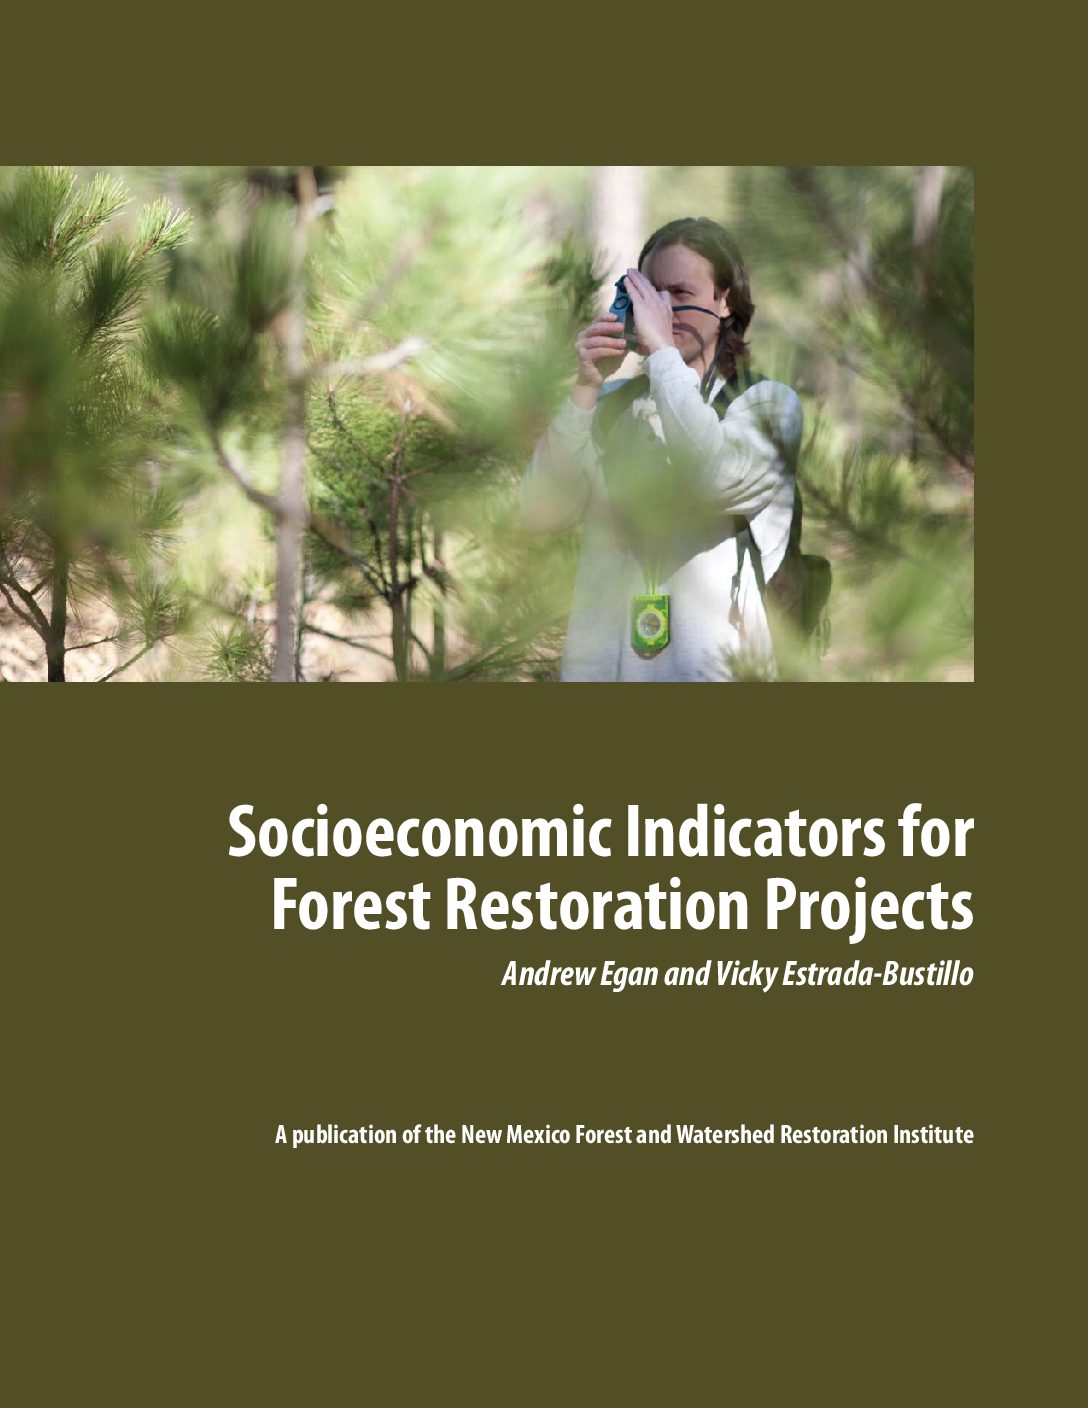 Socioeconomic Indicators for Forest Restoration Projects